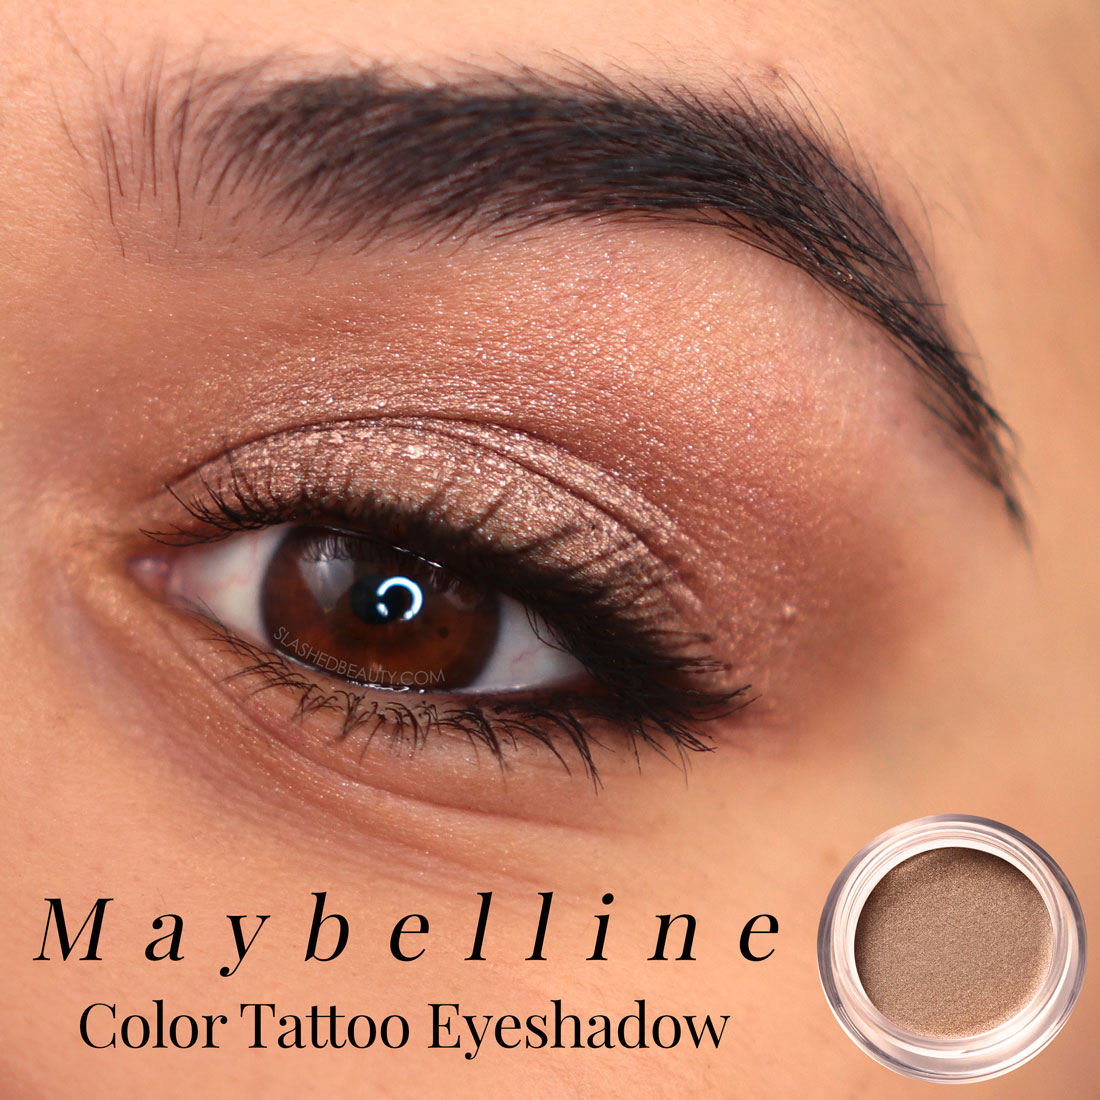 Close up of eye wearing Maybelline Color Tattoo Cream Eyeshadow in High Roller - metallic bronze | The Best Eyeshadows for One and Done Looks | Slashed Beauty